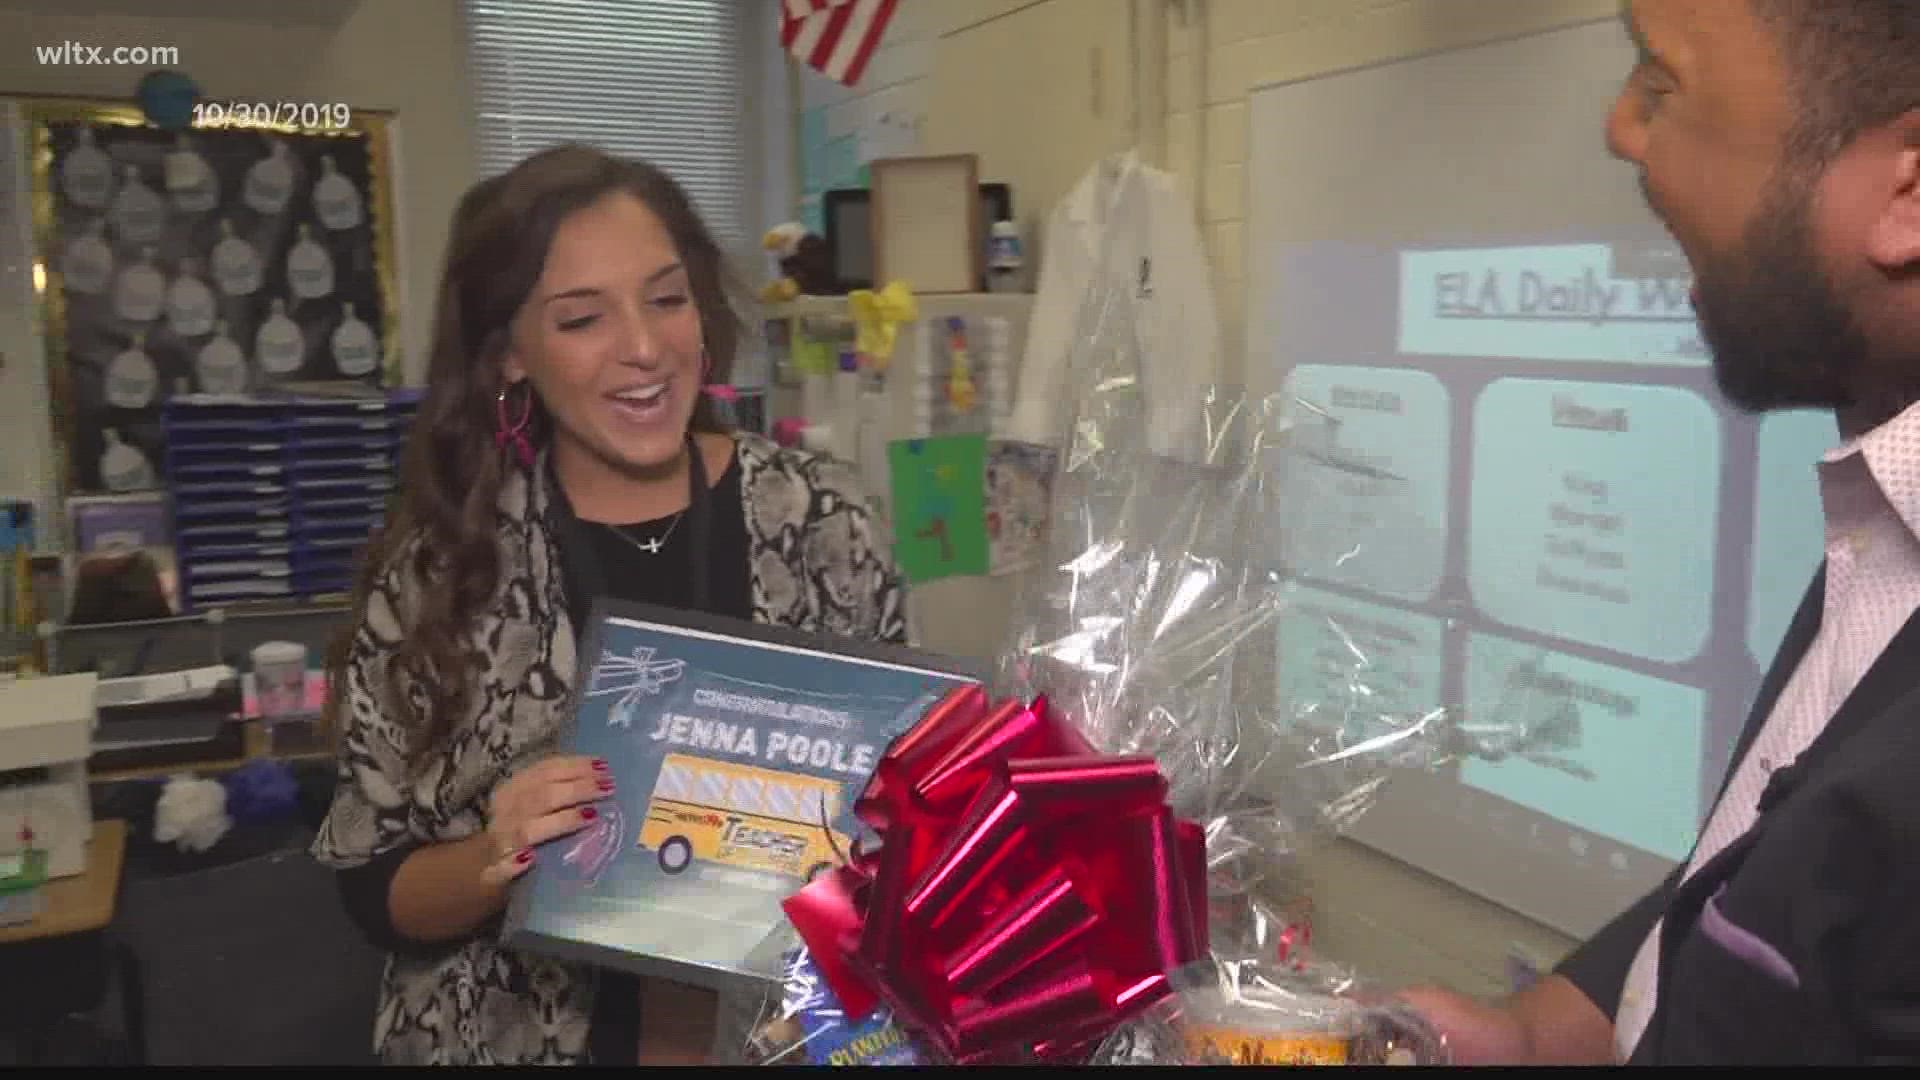 After a two-year hiatus, WLTX begins 'Teacher of the Week' is back and needs your nominations.